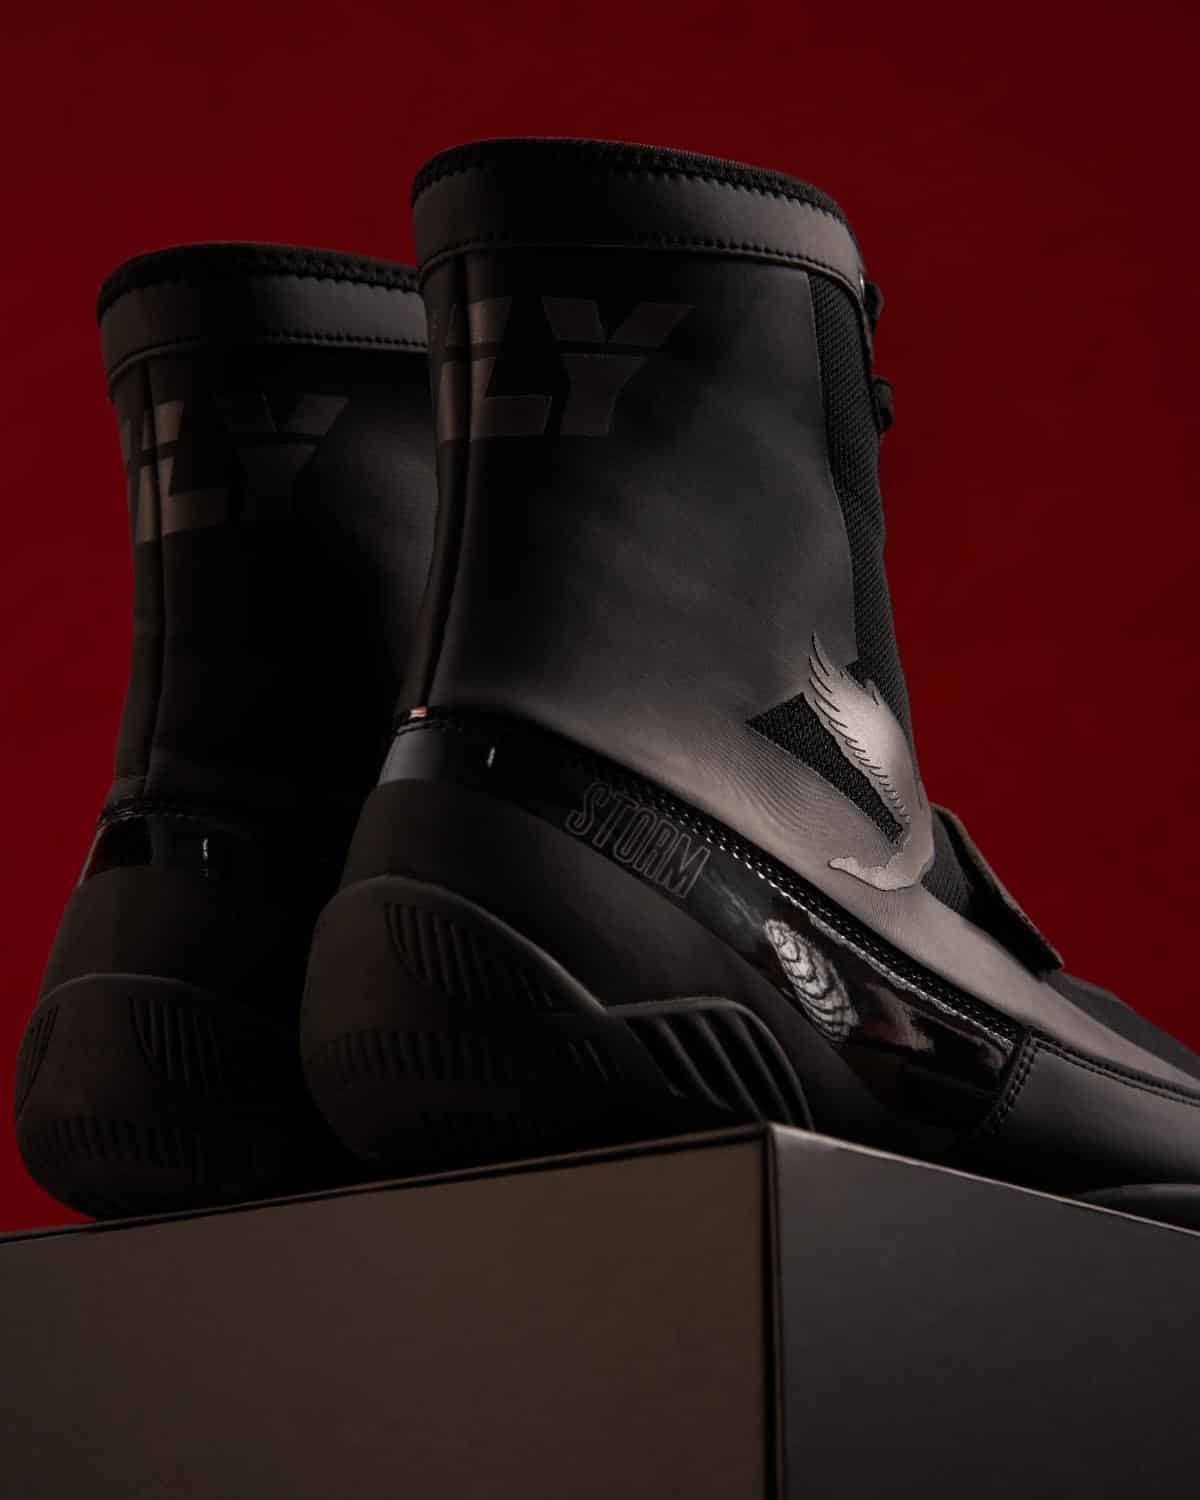 Luxury sportswear brand Fly launches new premium boxing boot - Boxing Image